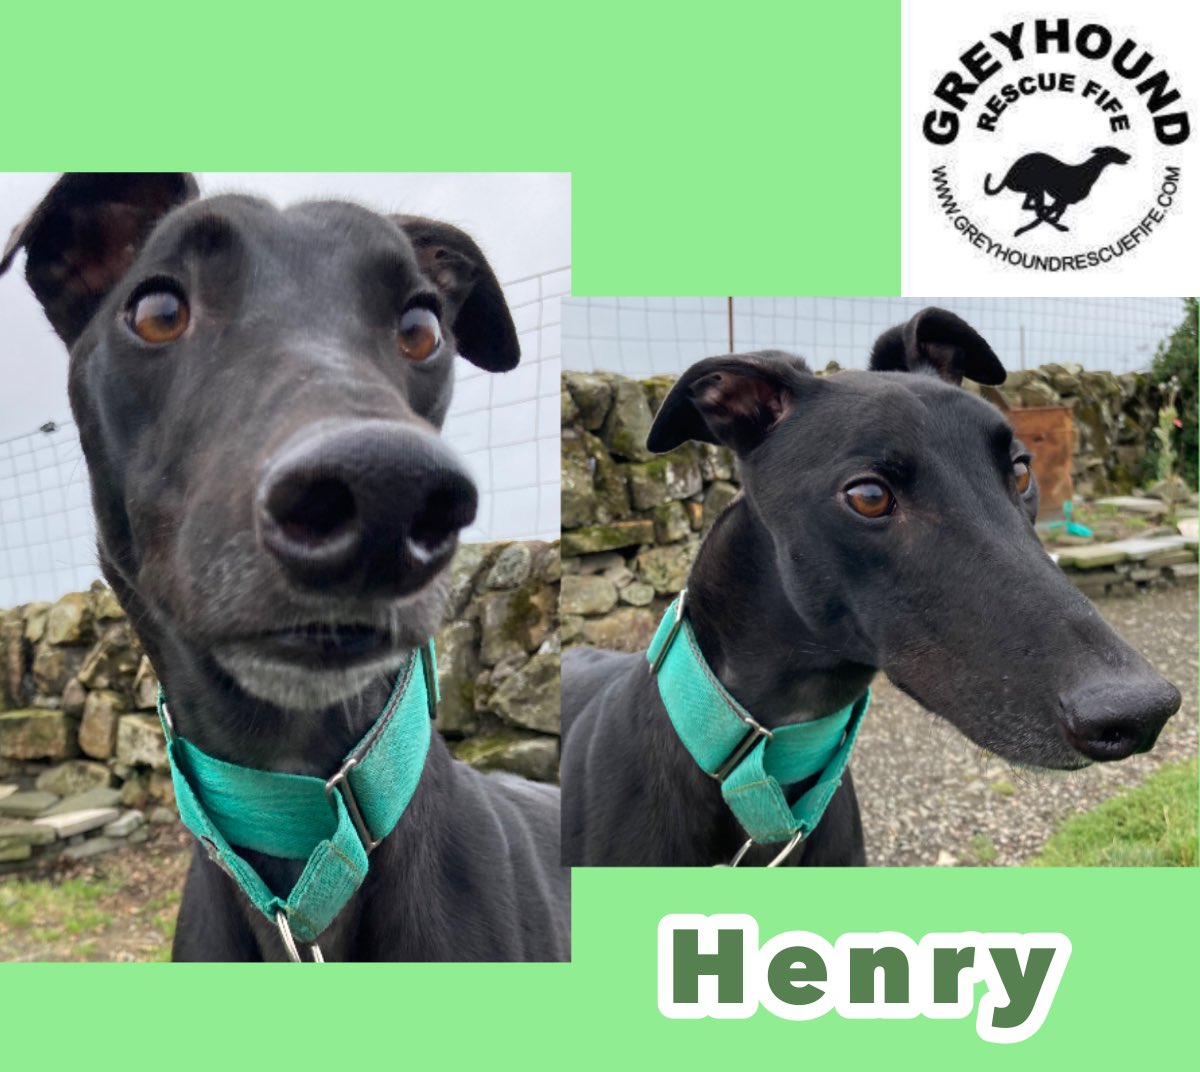 3 yr old Henry is still waiting for his #FureverHome Do you have room on your sofa & in your heart for this handsome boy? A fun lad who loves #walkies & playing with his toys. Interested, call Celia on 07826 244765 #AdoptDontShop #GreyhoundsMakeGreatPets #RescueGreyhound 🐾🐶🤞🏽💚